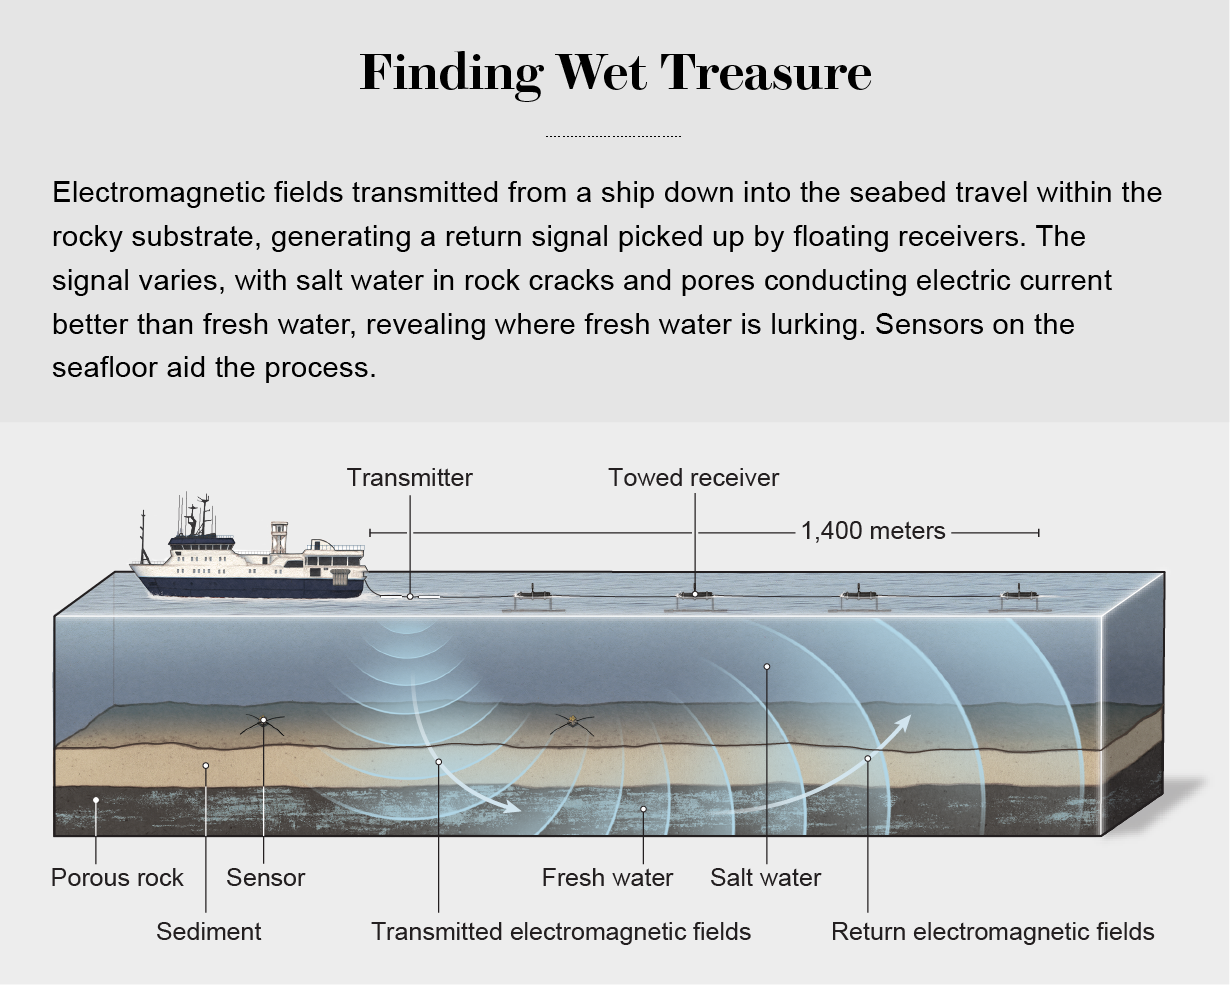 Graphic shows marine cross-section with a transmitter sending electromagnetic fields from a ship through the water and seabed and returning signals to a receiver to detect location of sub-seafloor fresh water.